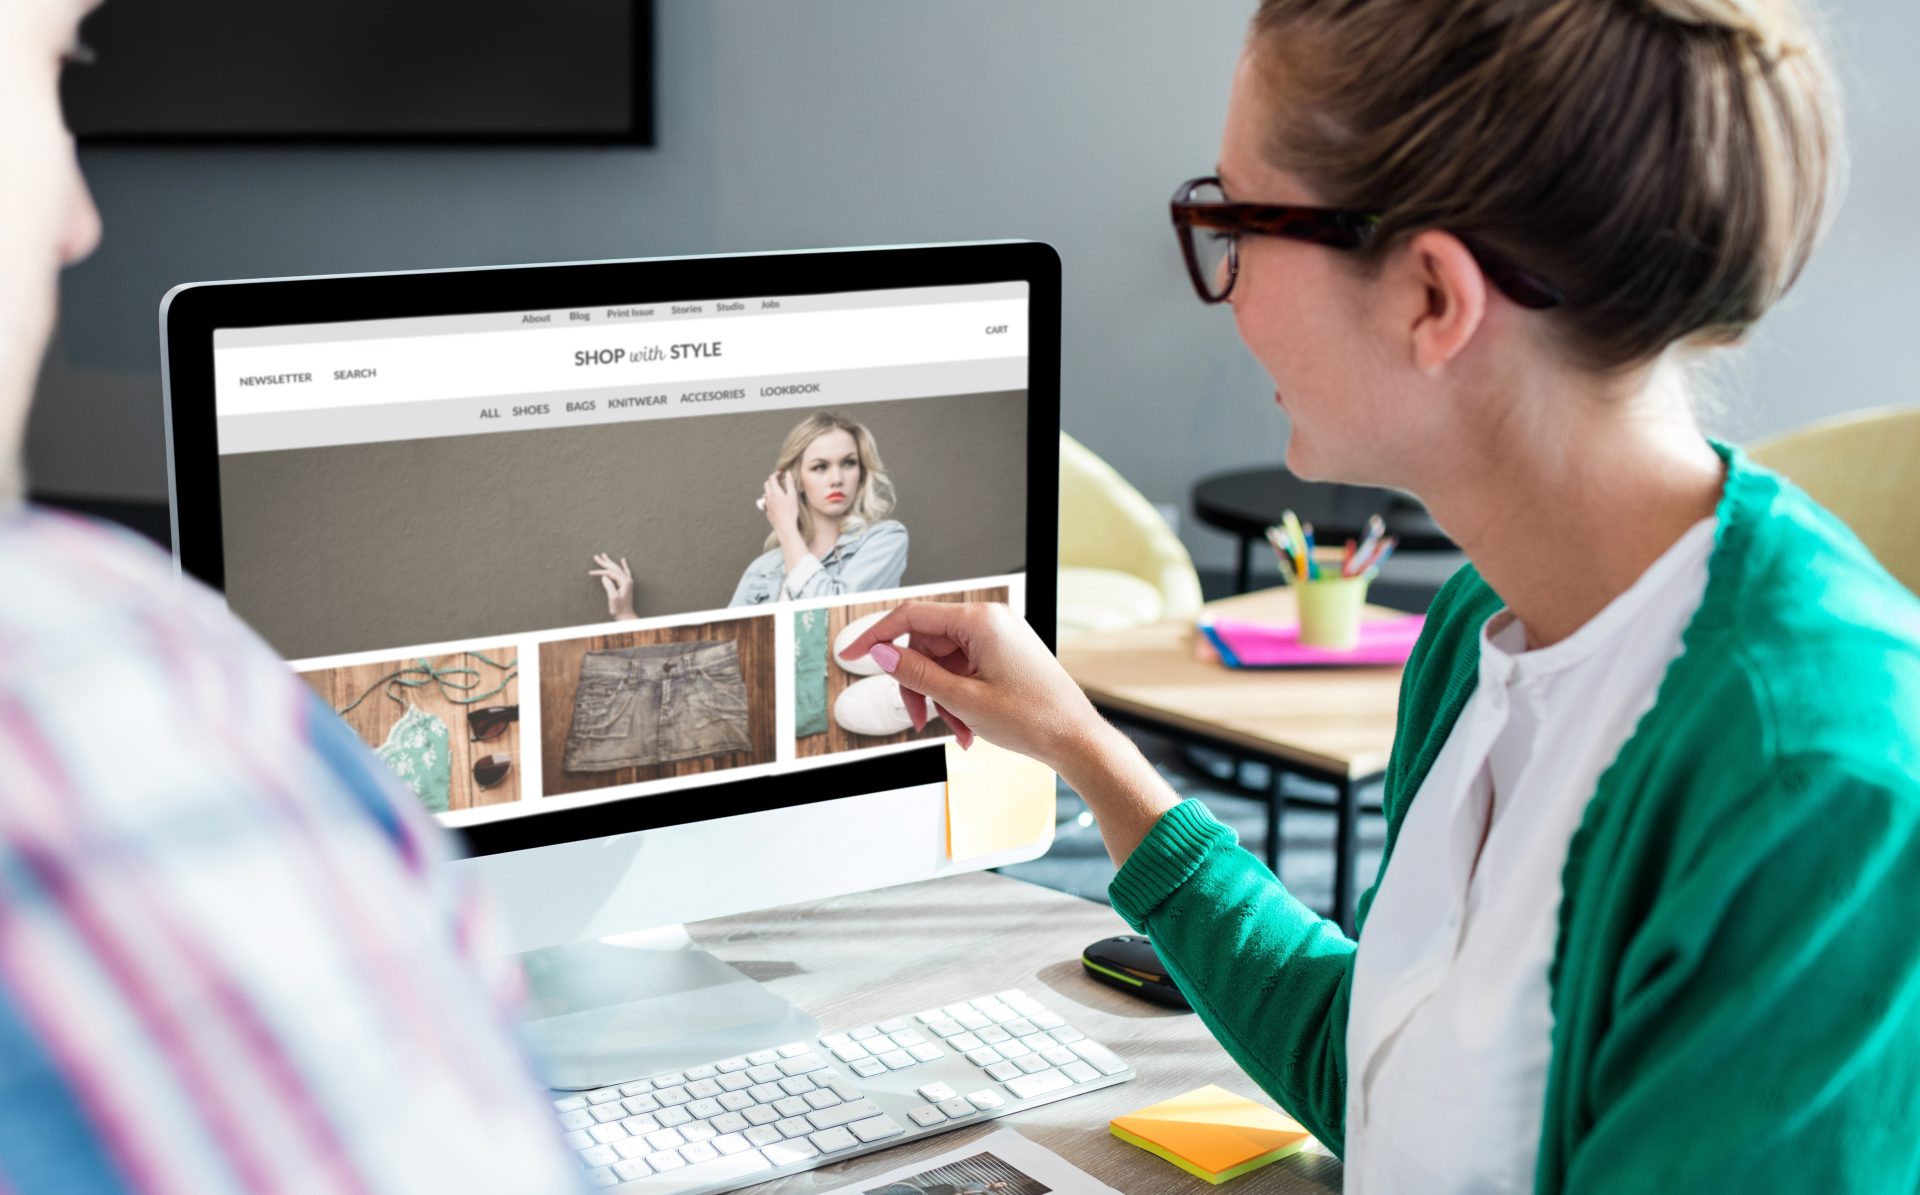 Business woman pointing to desktop screen portraying high-quality images of fashion.